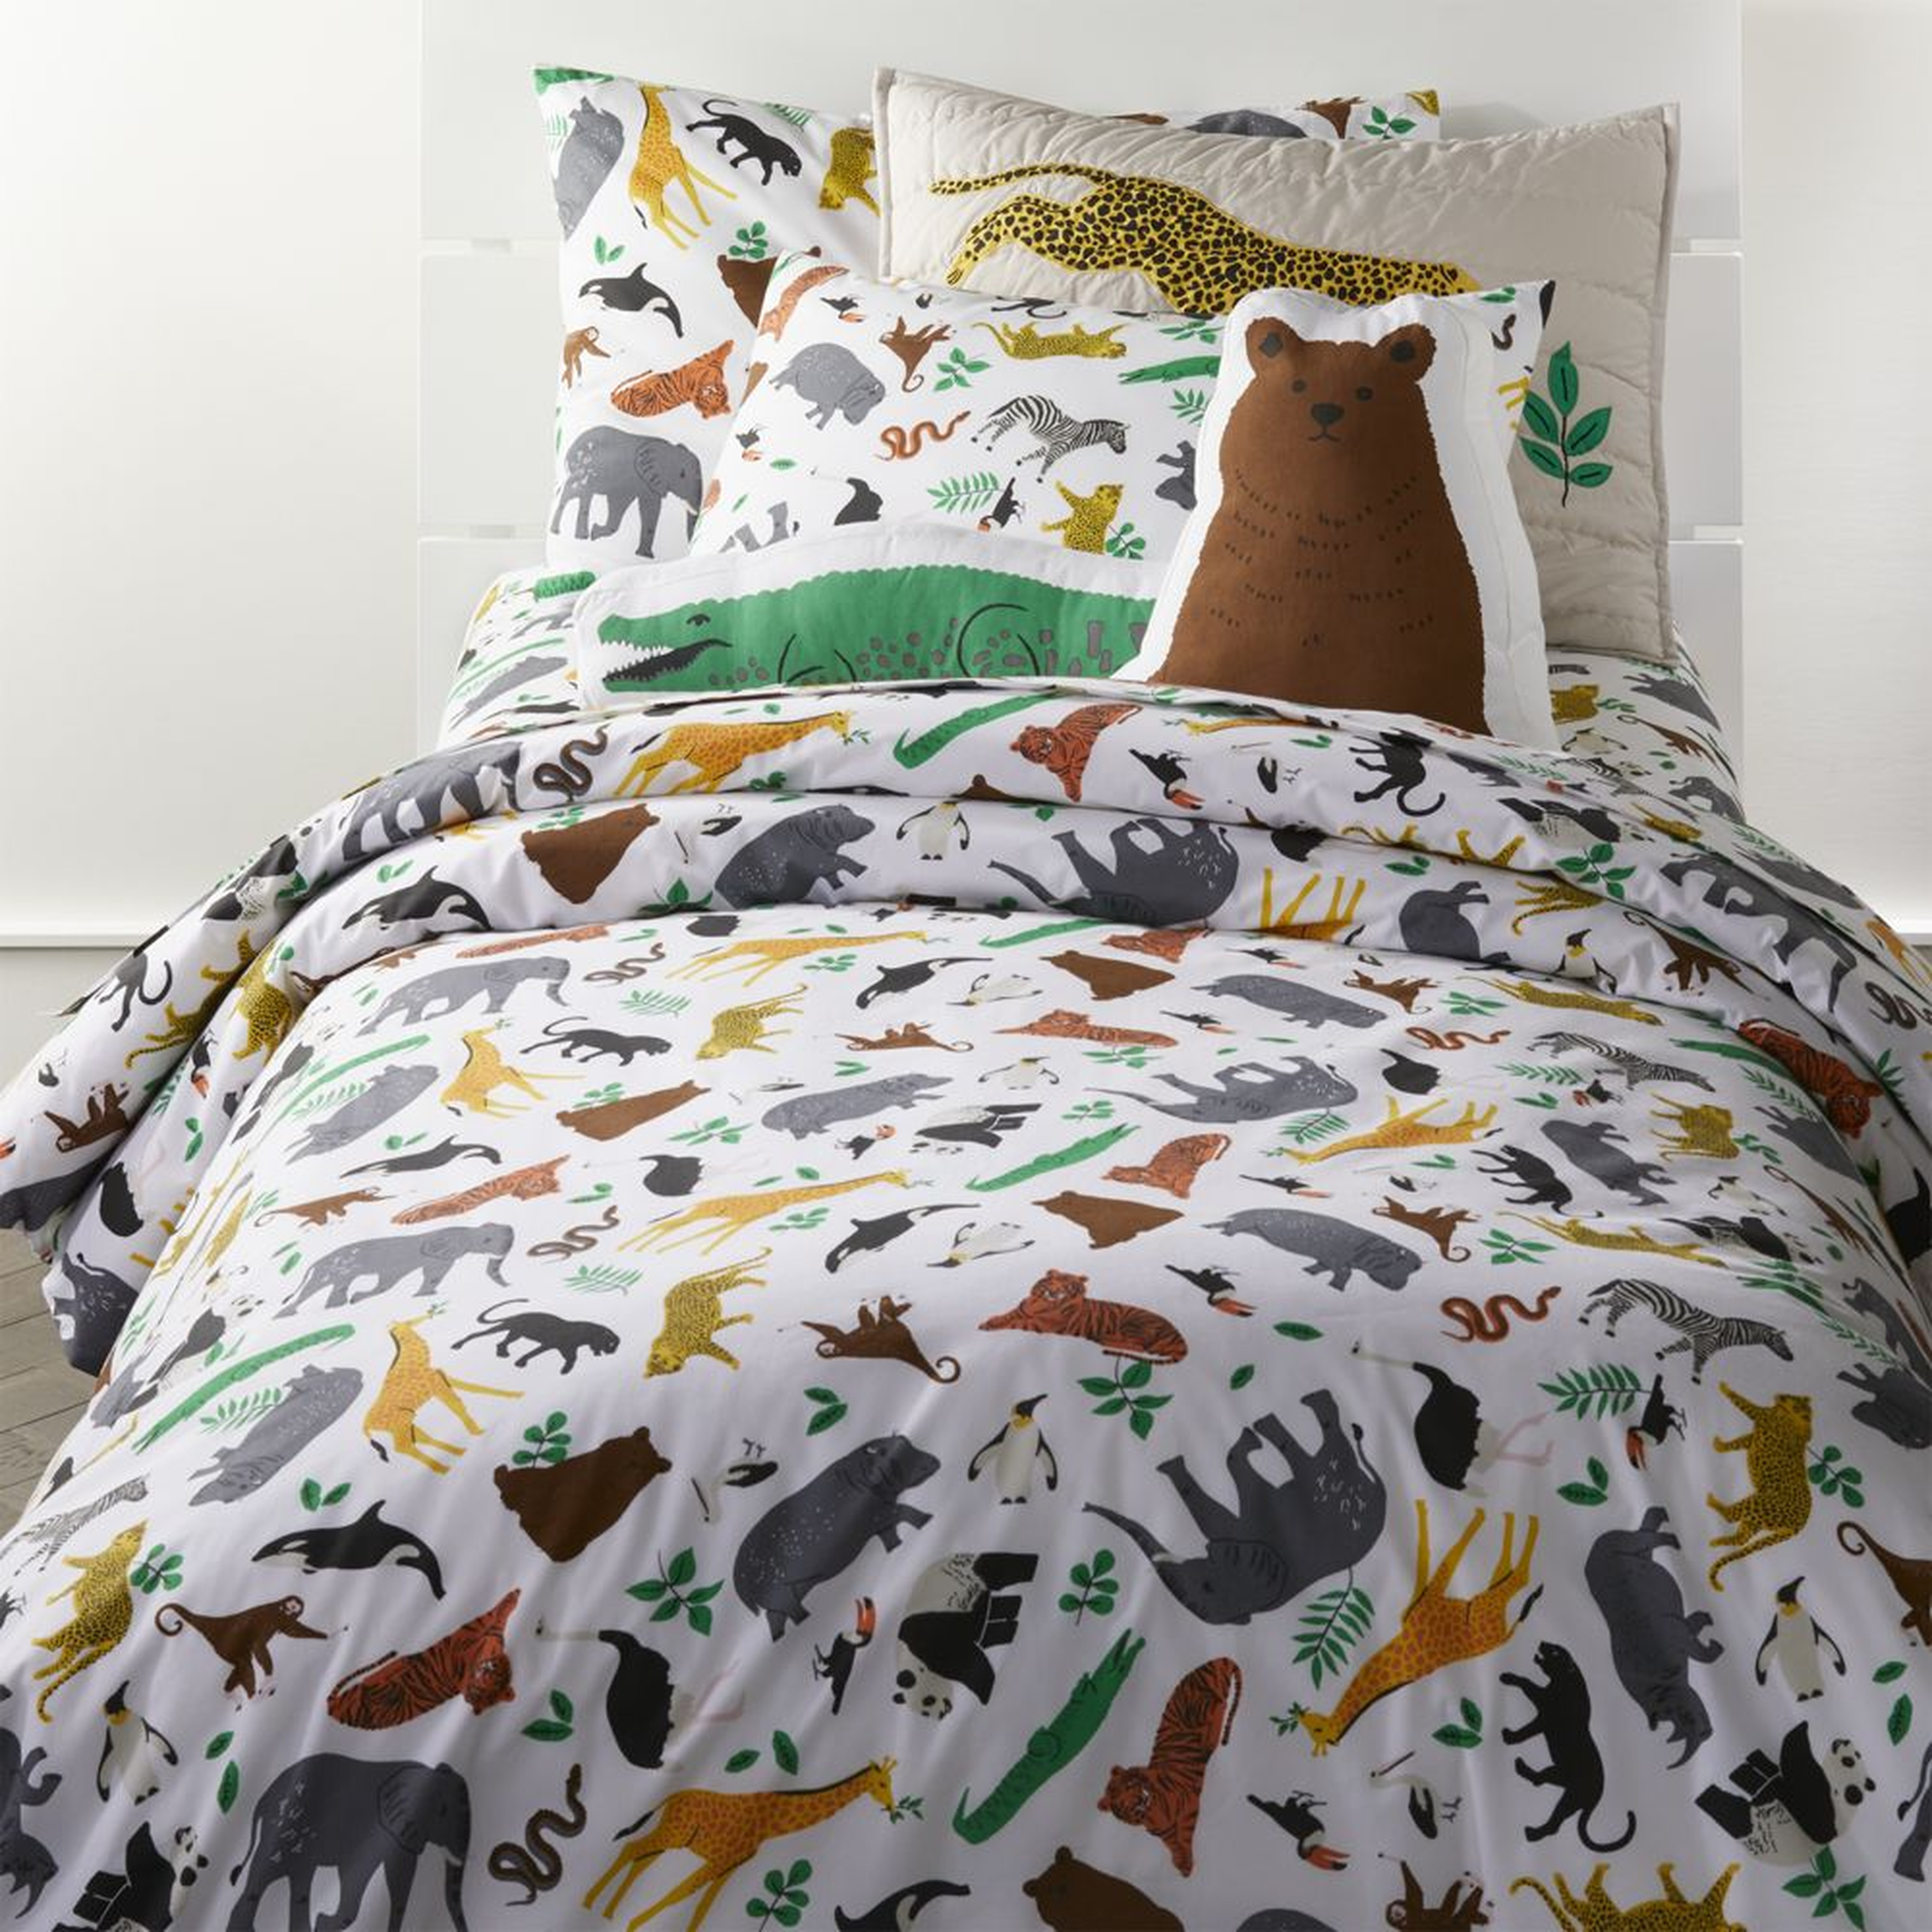 Organic Jungle Animal Twin Duvet Cover - Crate and Barrel